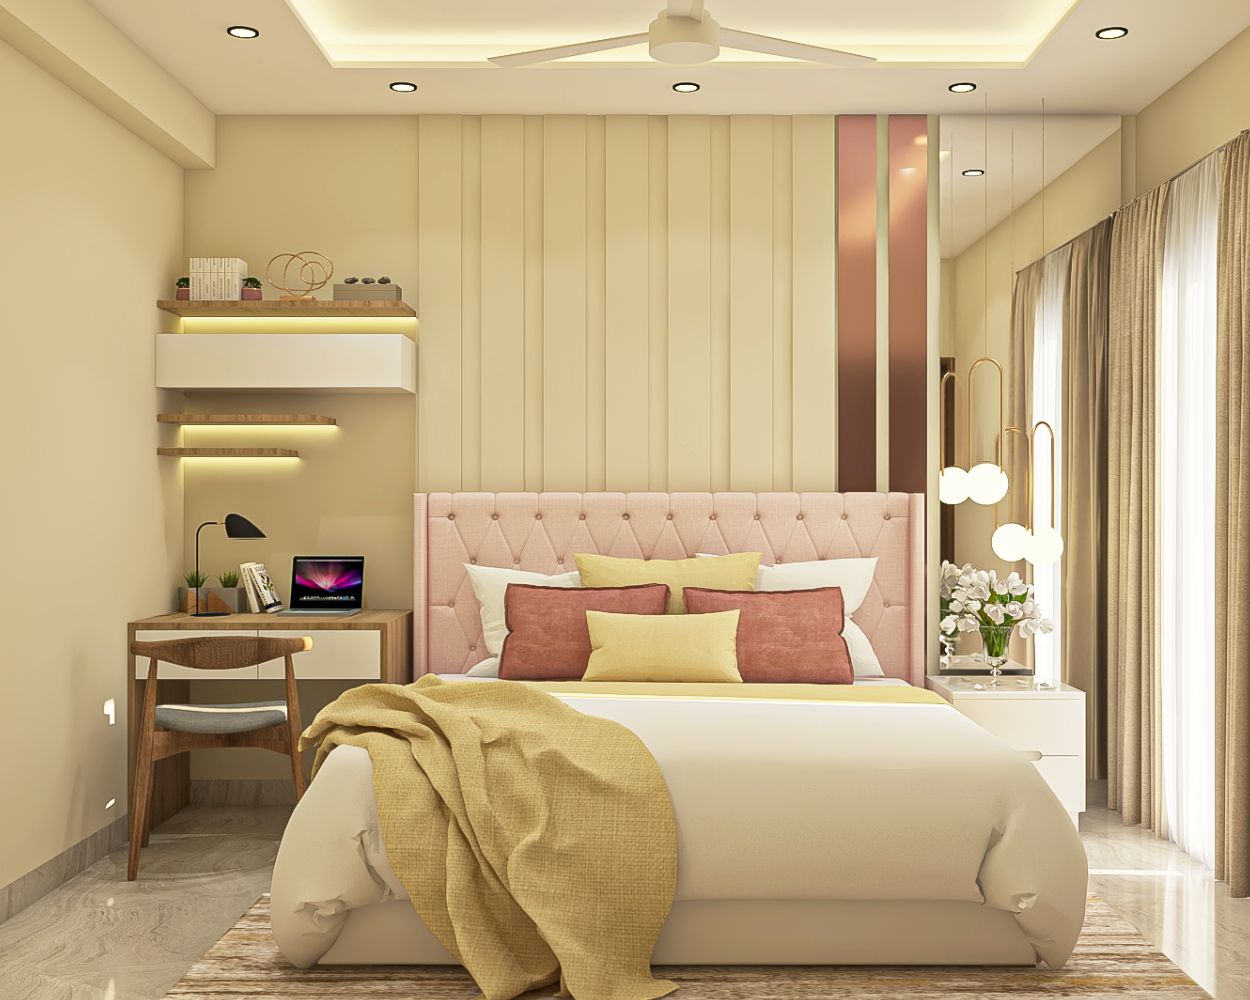 Contemporary Beige And Pink Guest Room Design With Striped Wall Panel